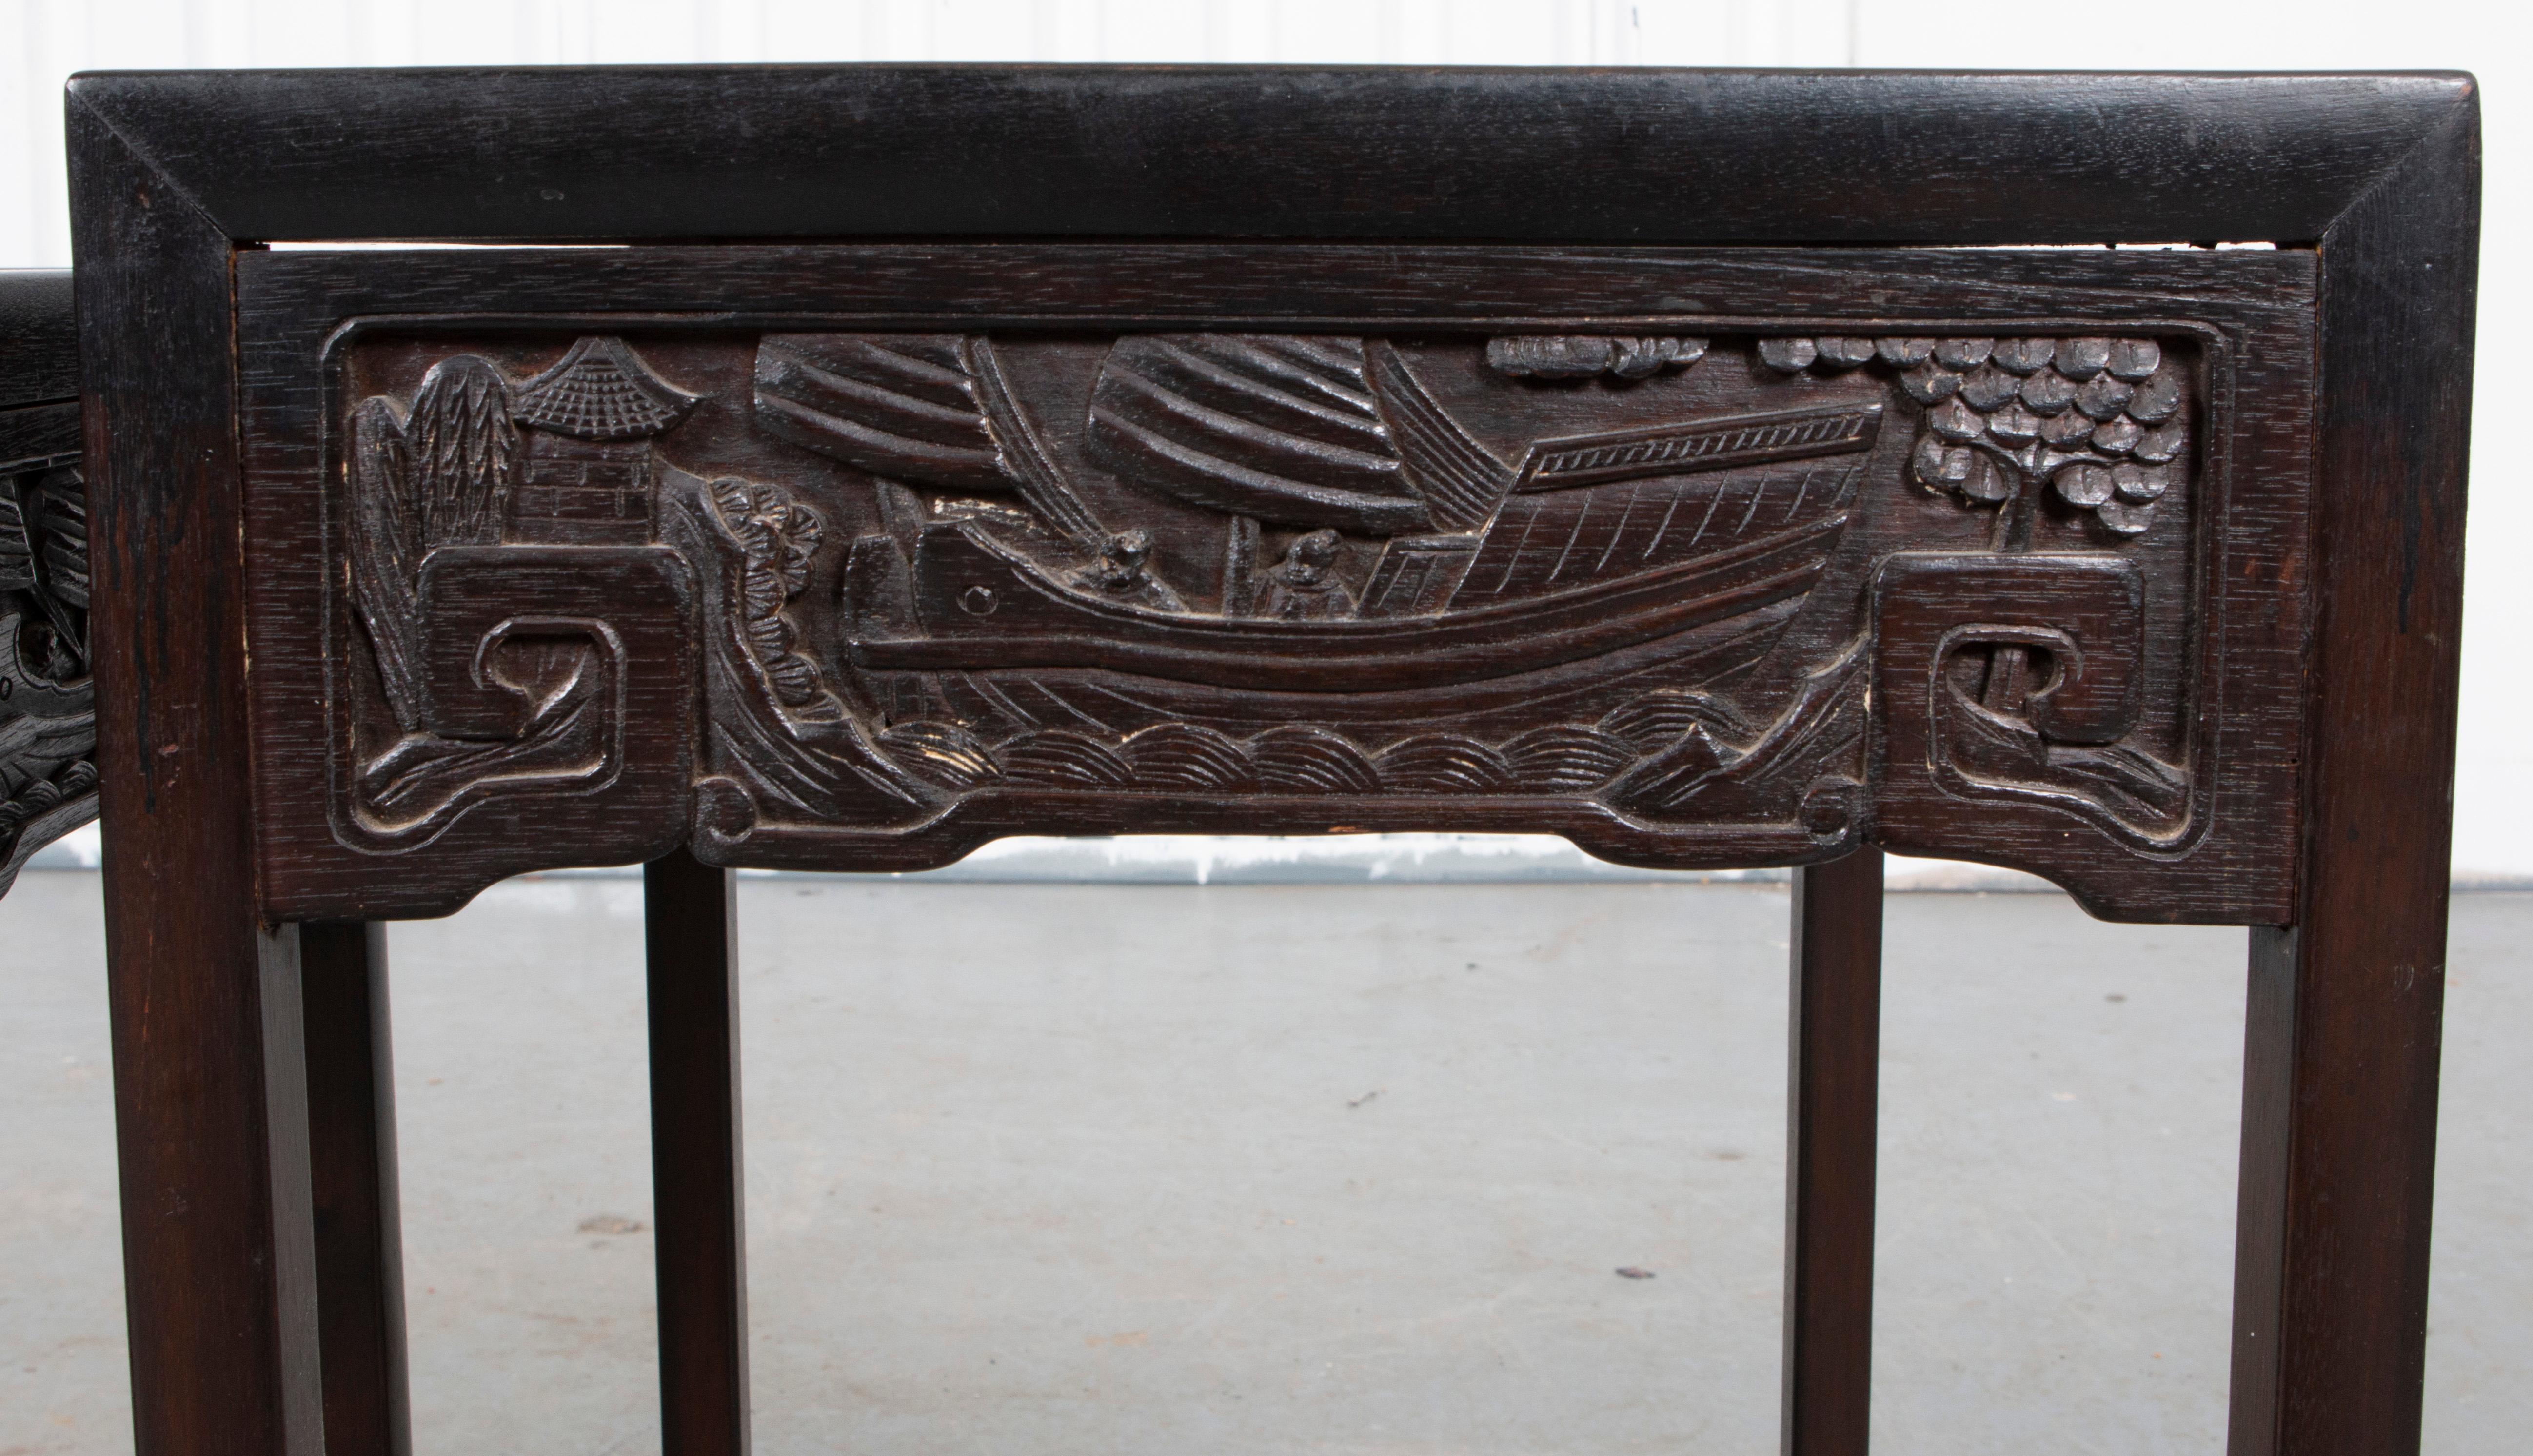 Chinese ebonized nesting tables with carved friezes. Largest 23.75” H x 13.75” W x 15.5” D.